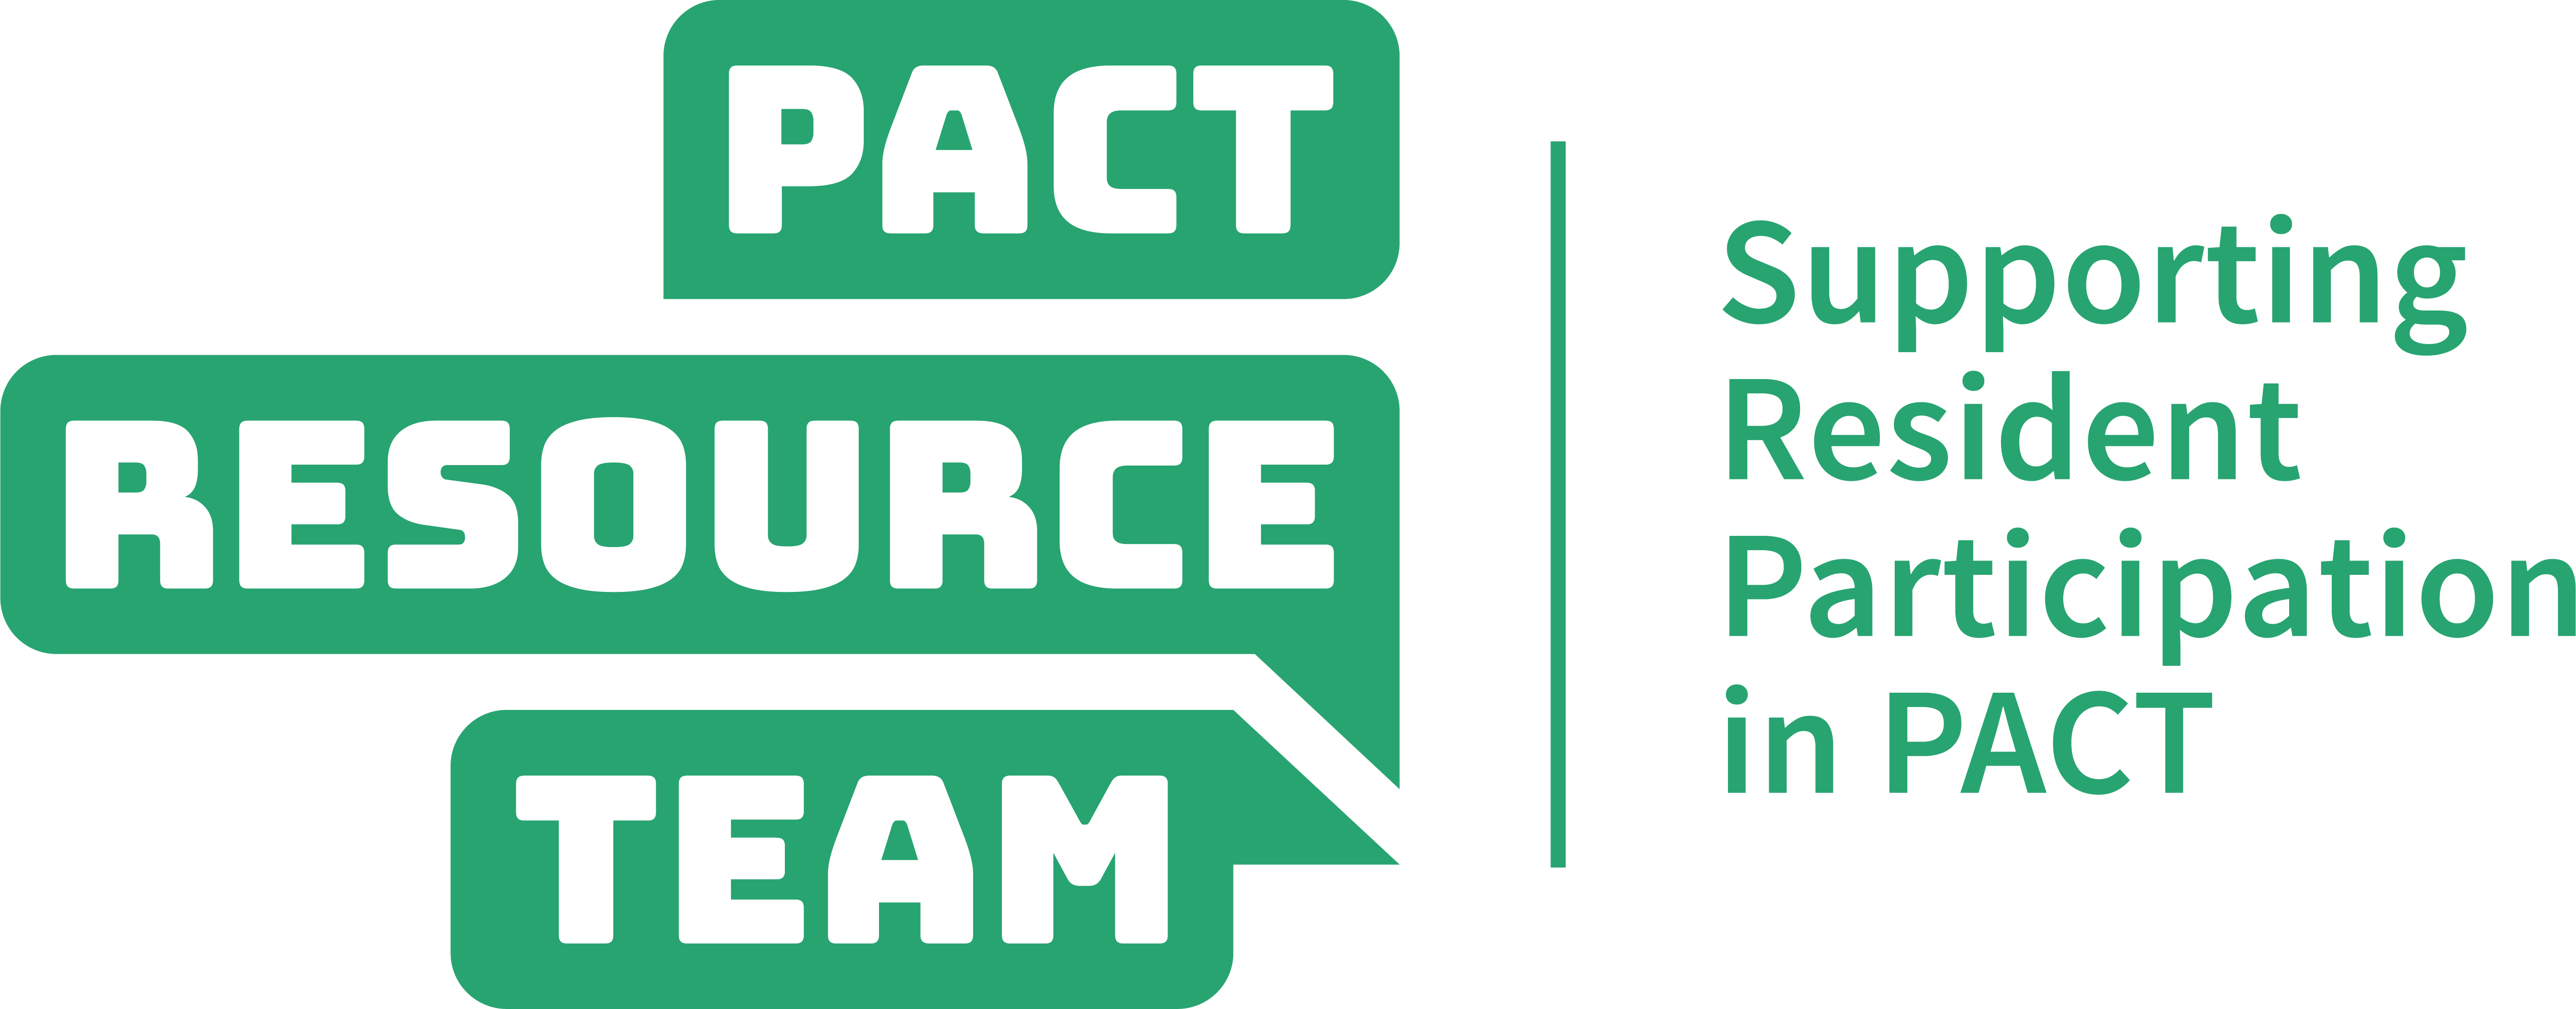 PACT Resource Team